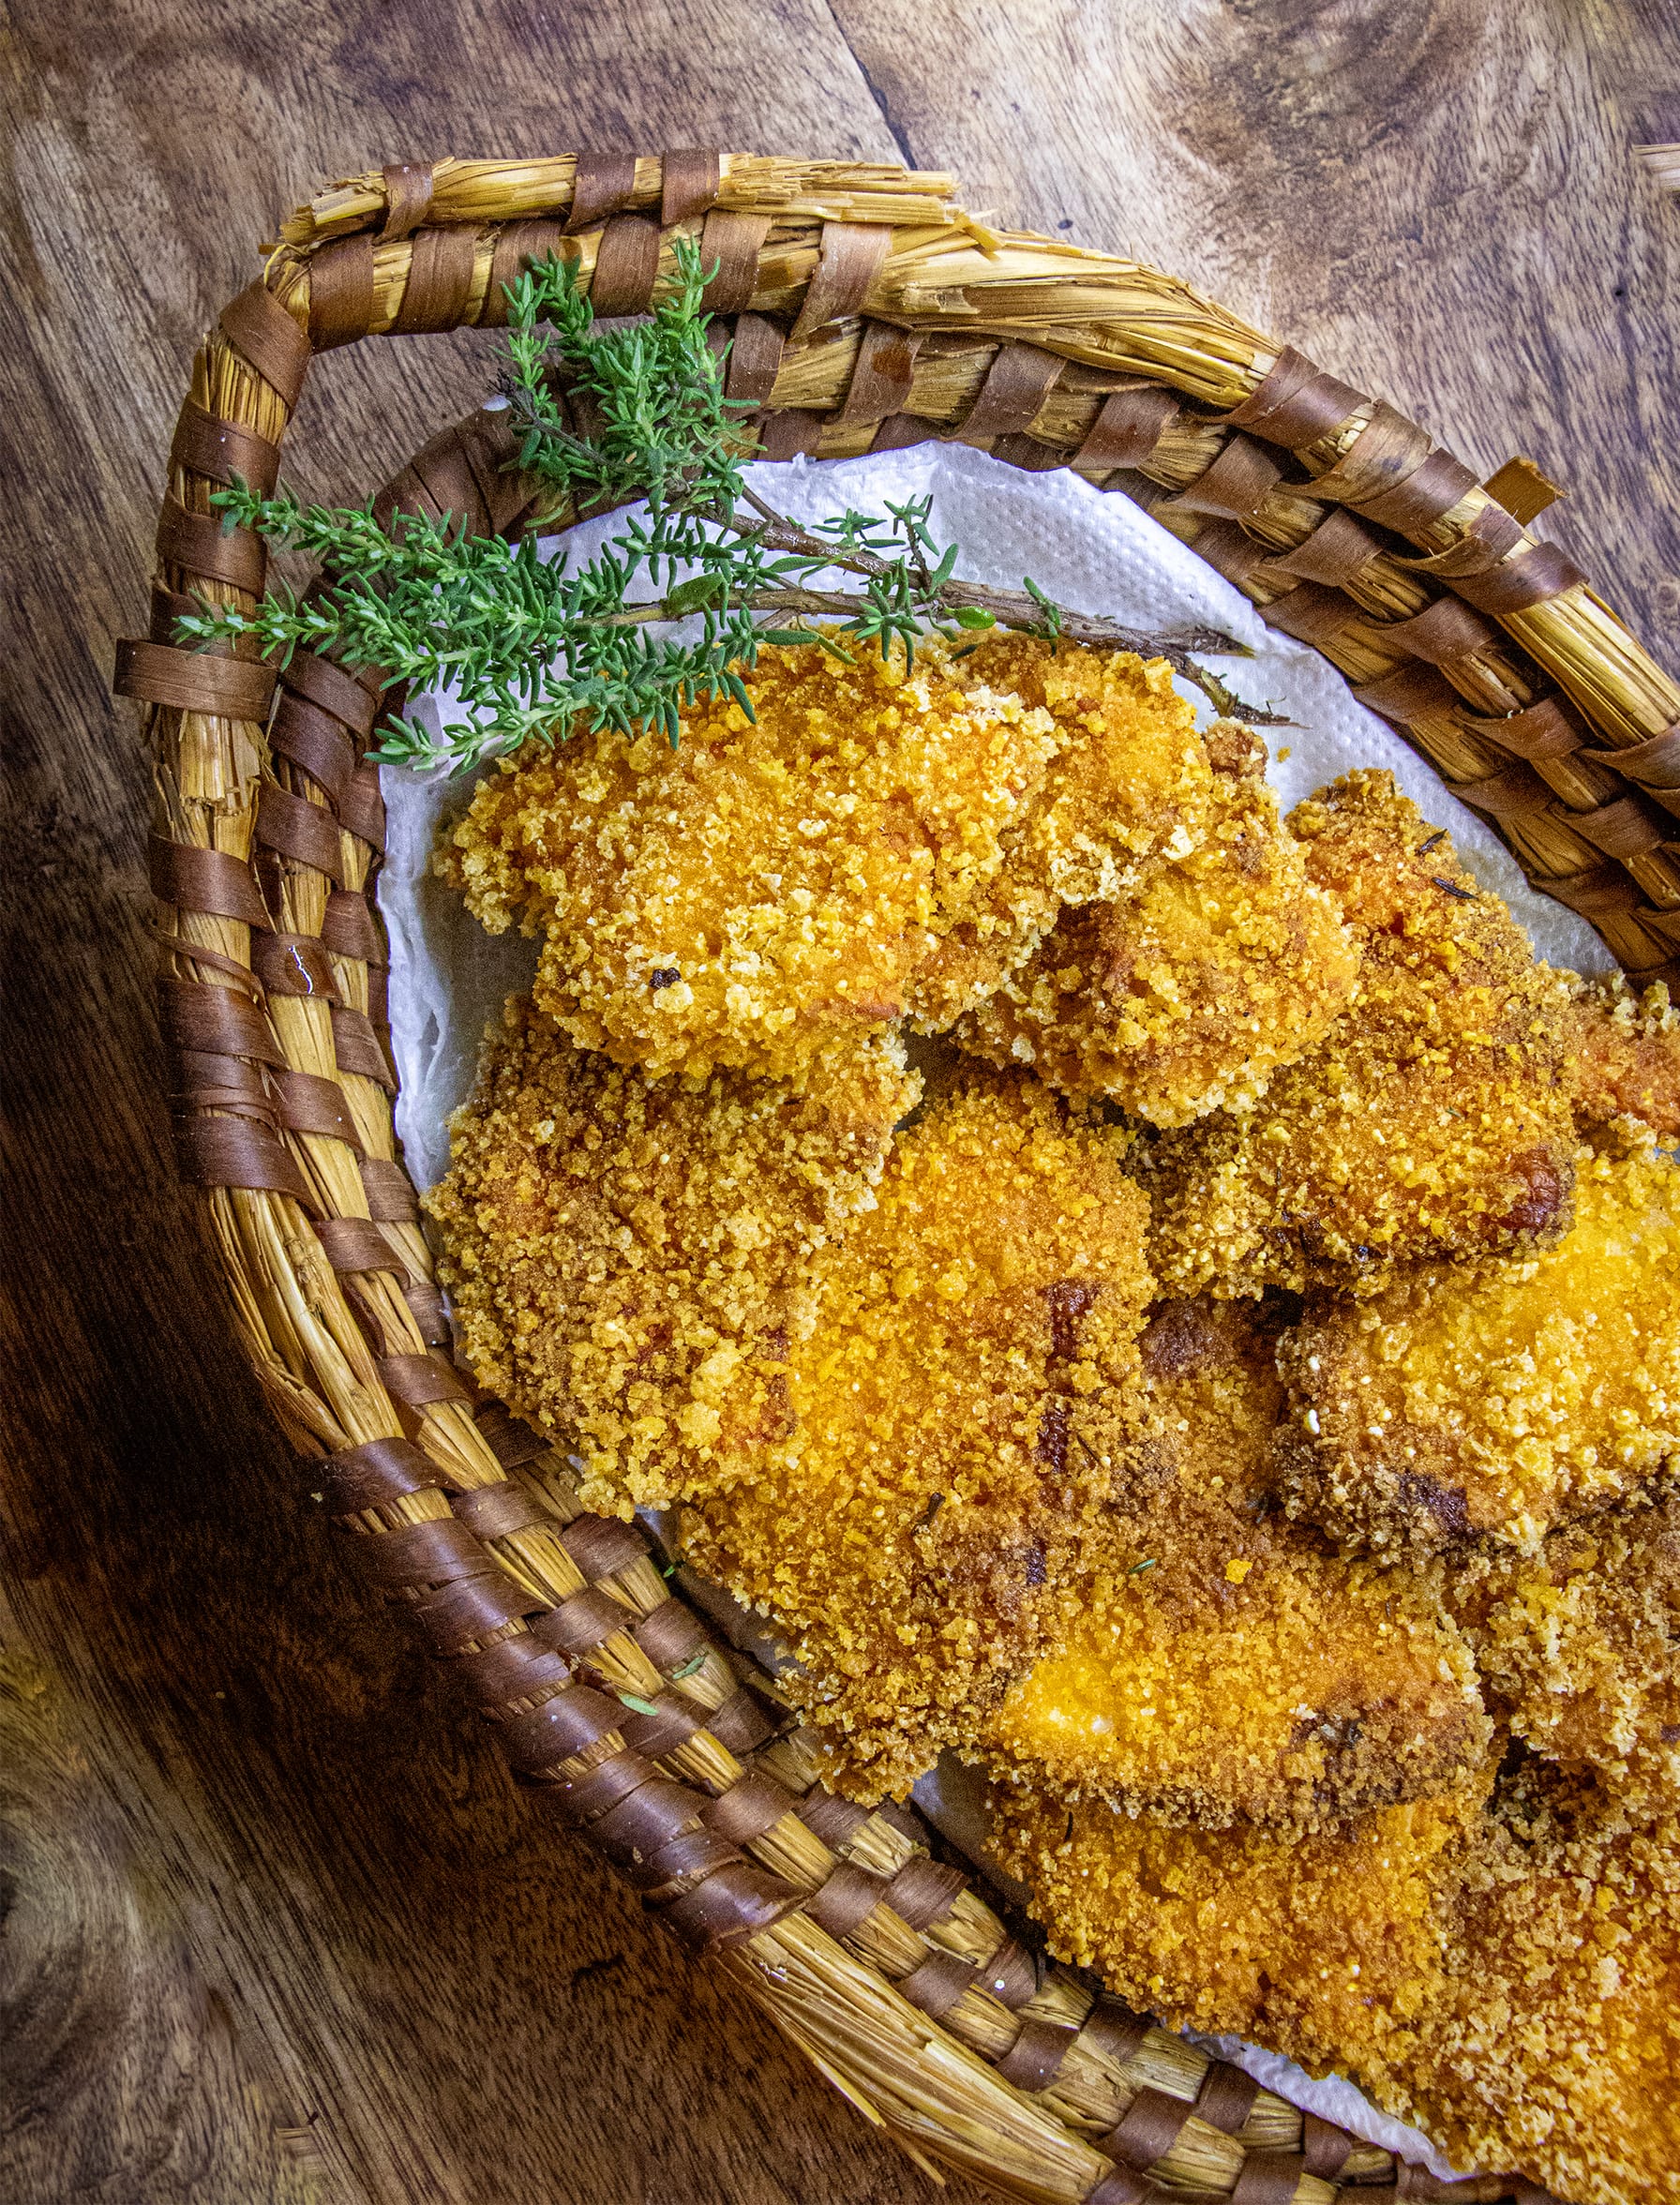 Fried Chicken of the Woods | Recipe by FUNGIWOMAN